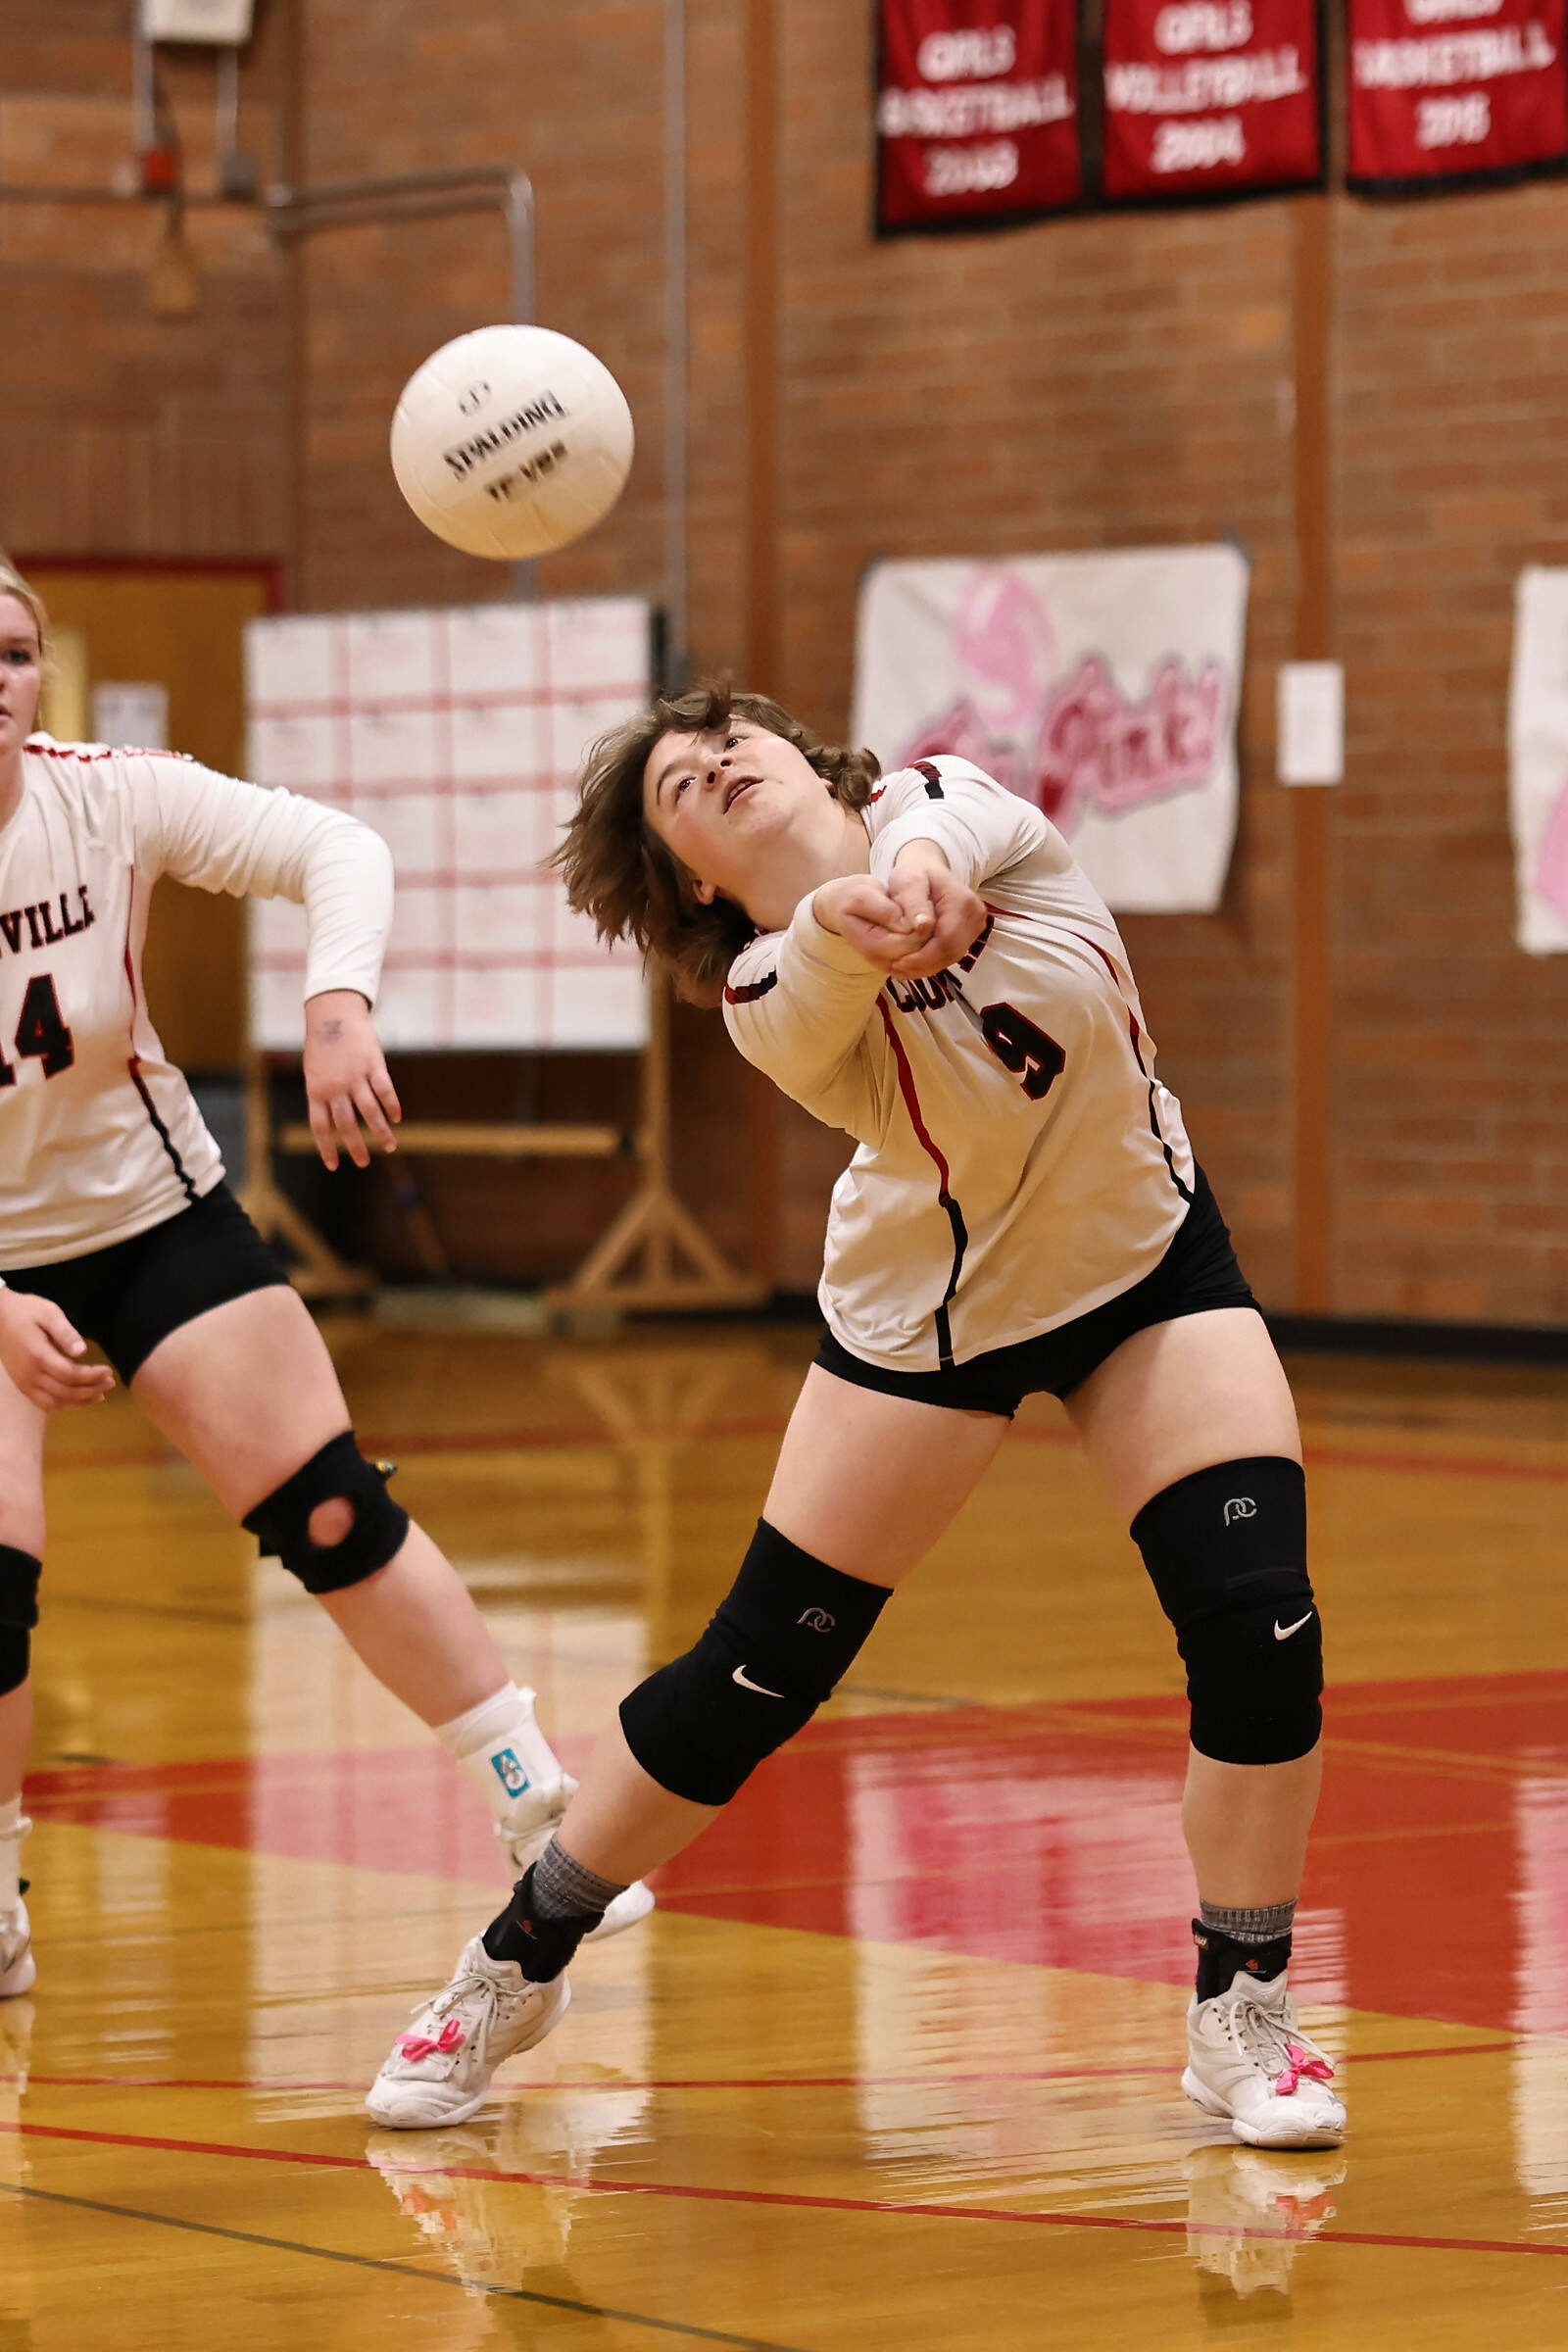 Photo by John Fisken
Coupeville athlete Taygin Jump competes in the Oct. 15 match against Neah Bay. Coupeville defeated Neah Bay 3-1. Coupeville High School’s varsity volleyball team is 8-3 overall this season.